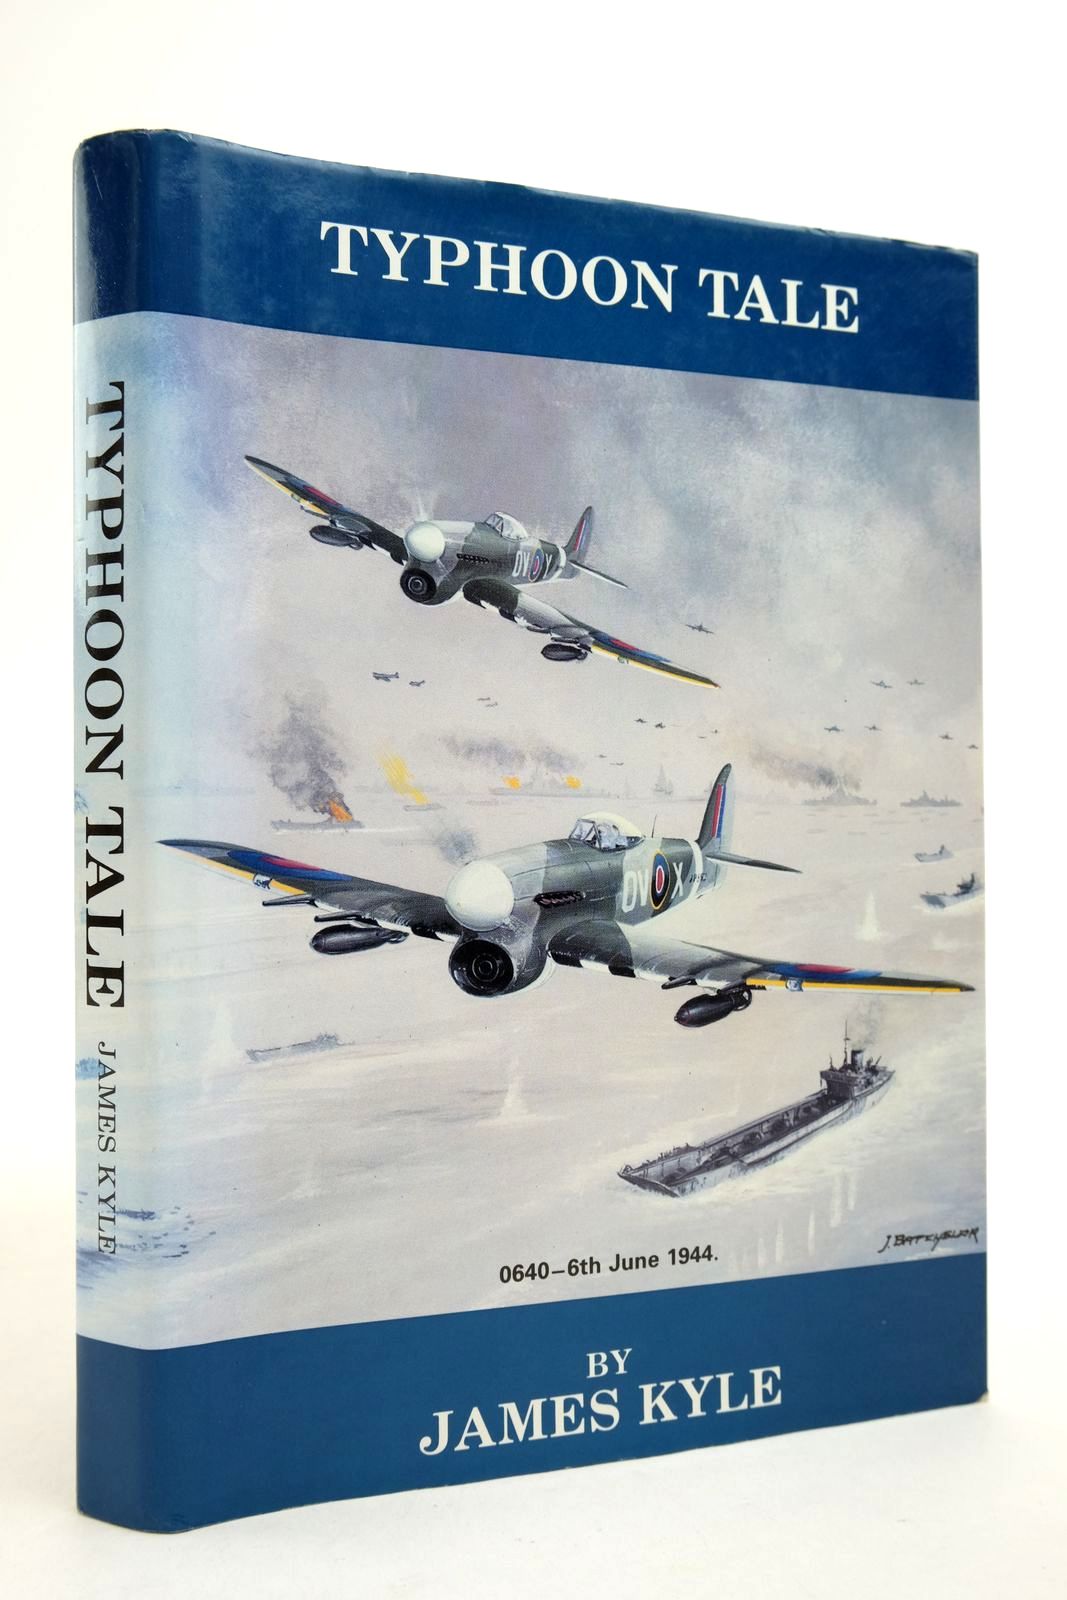 Photo of TYPHOON TALE written by Kyle, James published by Biggar &amp; Co. (publishers) Ltd. (STOCK CODE: 2140664)  for sale by Stella & Rose's Books